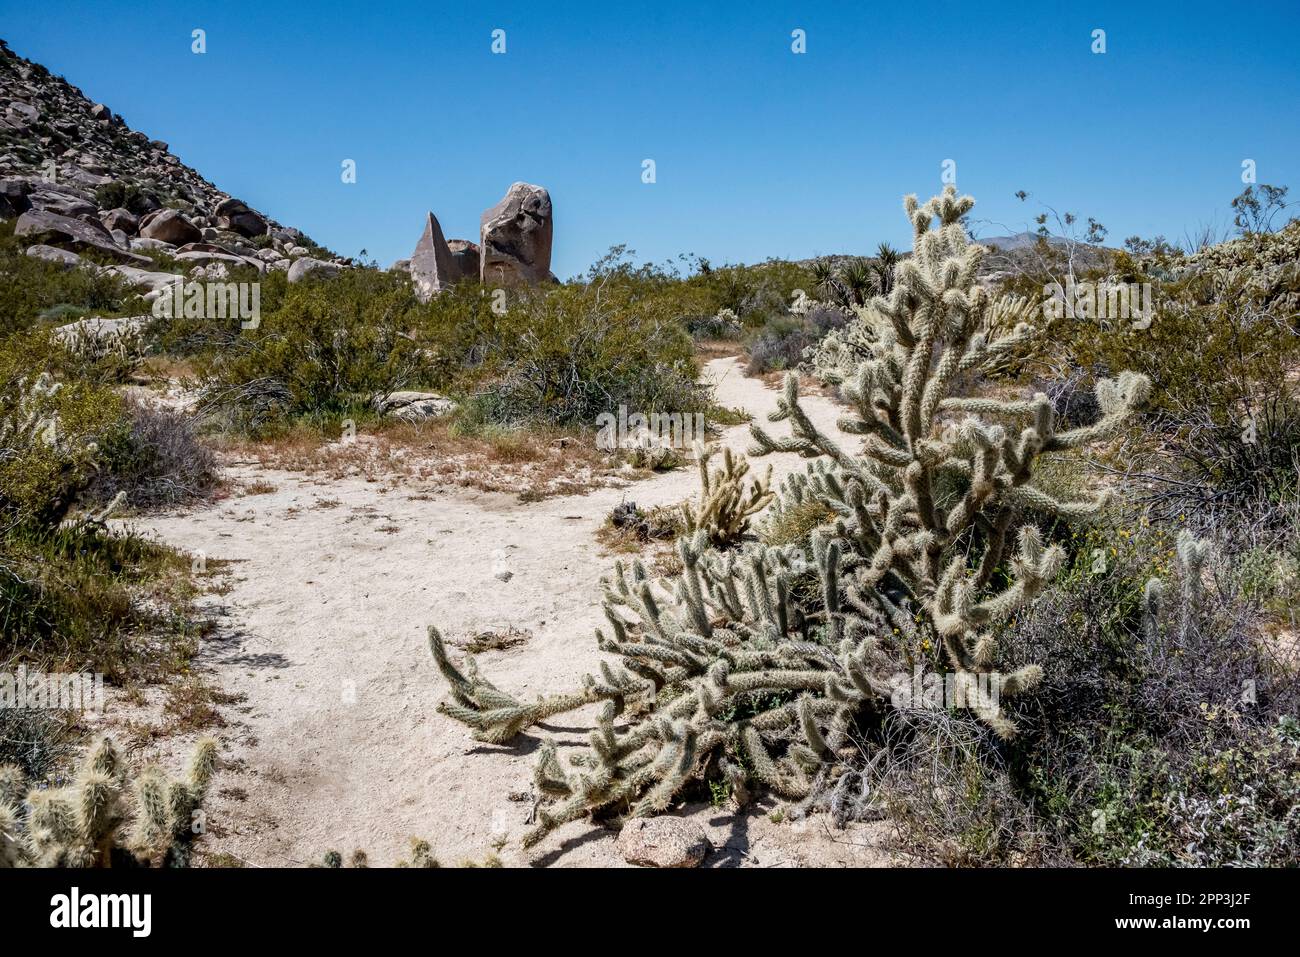 Ehmuu morteros trail with cactus, rocks, desert shrubs in Blair Valley Cultural Preserve, Anza Borrego Desert State Park, traditional home to Kumeyaay Stock Photo